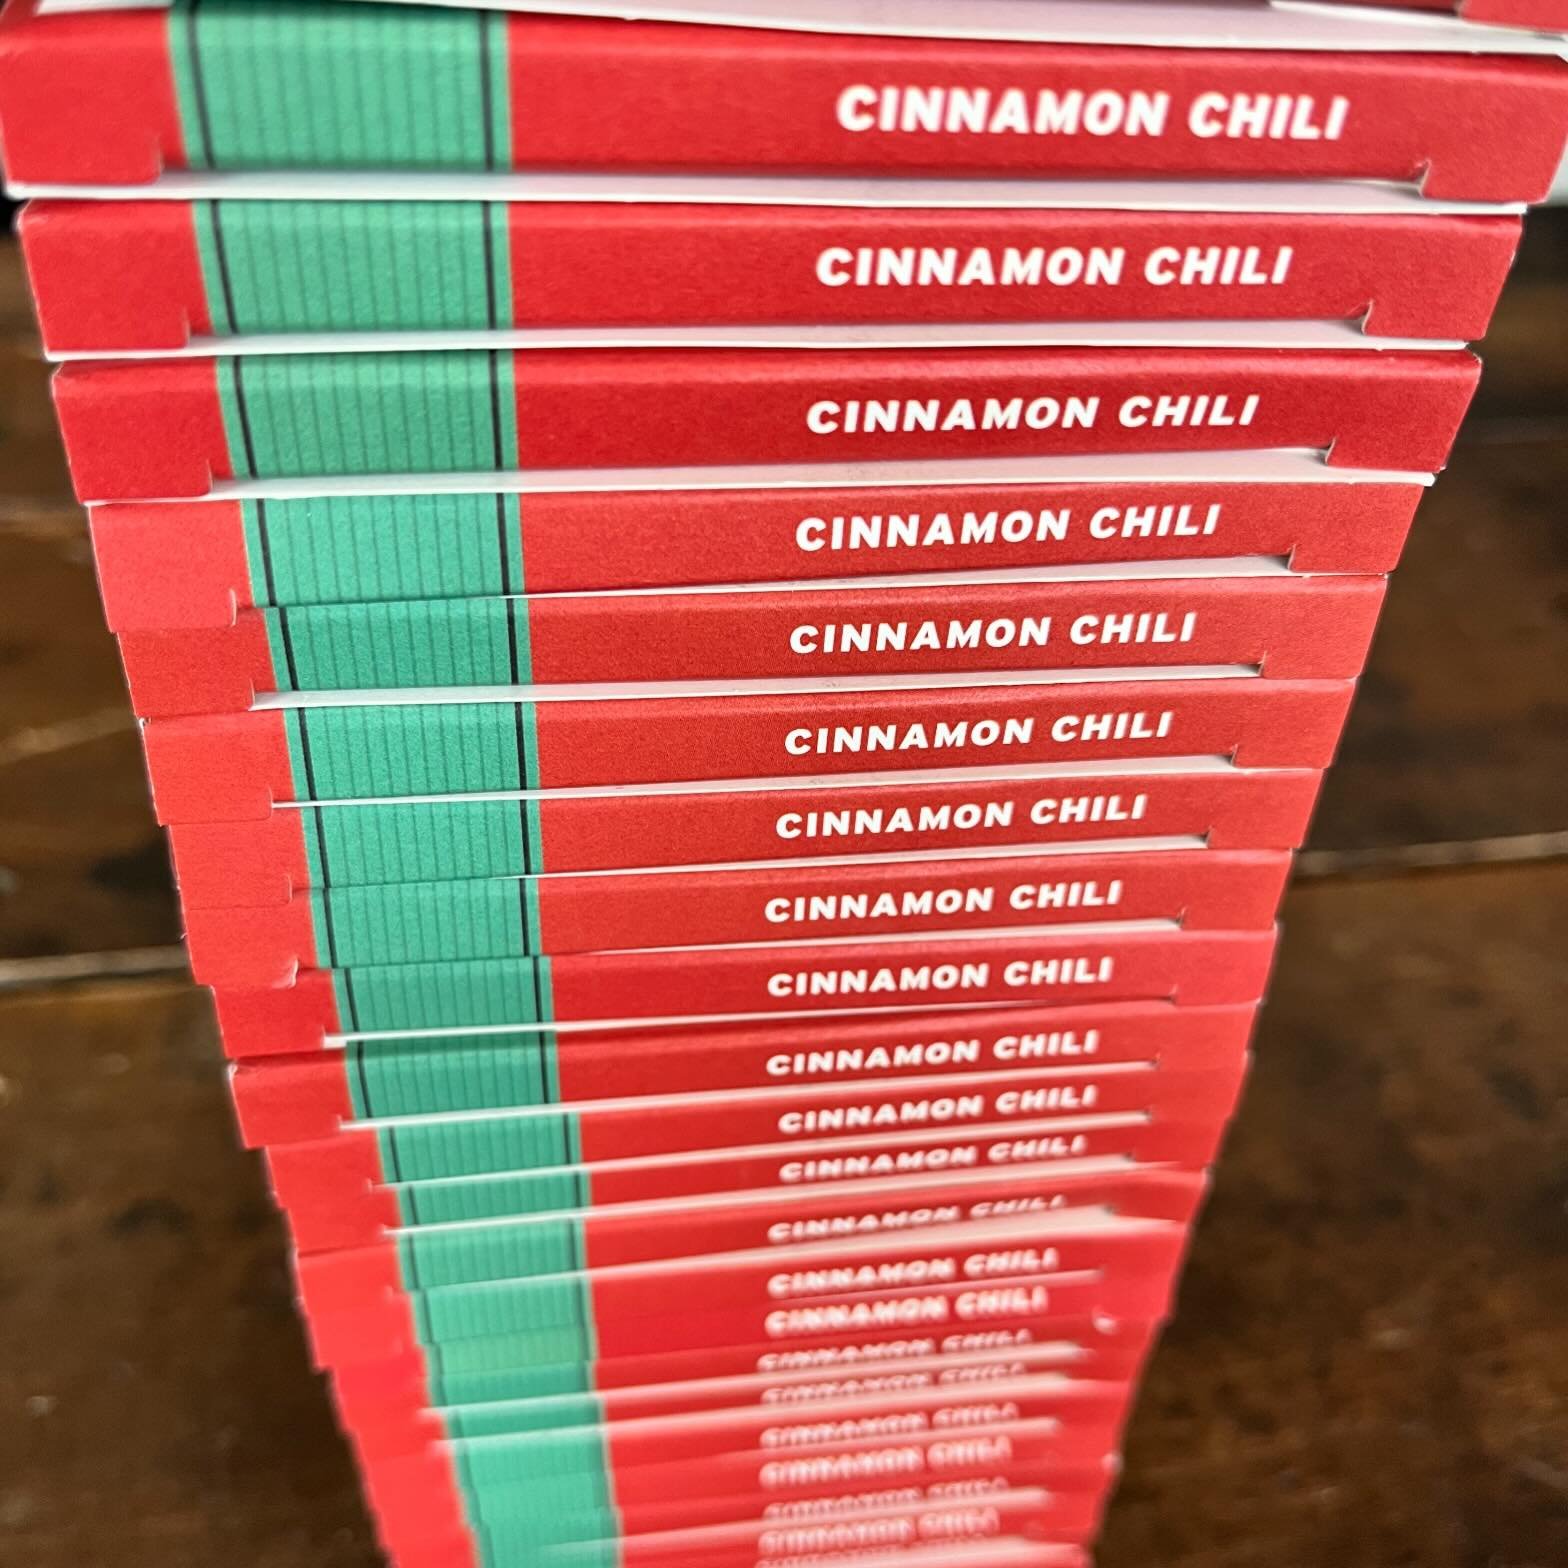 You and two friends have one hour to finish this stack of Cinnamon Chili goodness. Who you callin&rsquo; for help? Tag &lsquo;em!&bull;
&bull;
#oliveandsinclair #chocolatemaker #cinnamonchili #mexicanchocolate #silly #teammates #whoyoucalling #shoplo